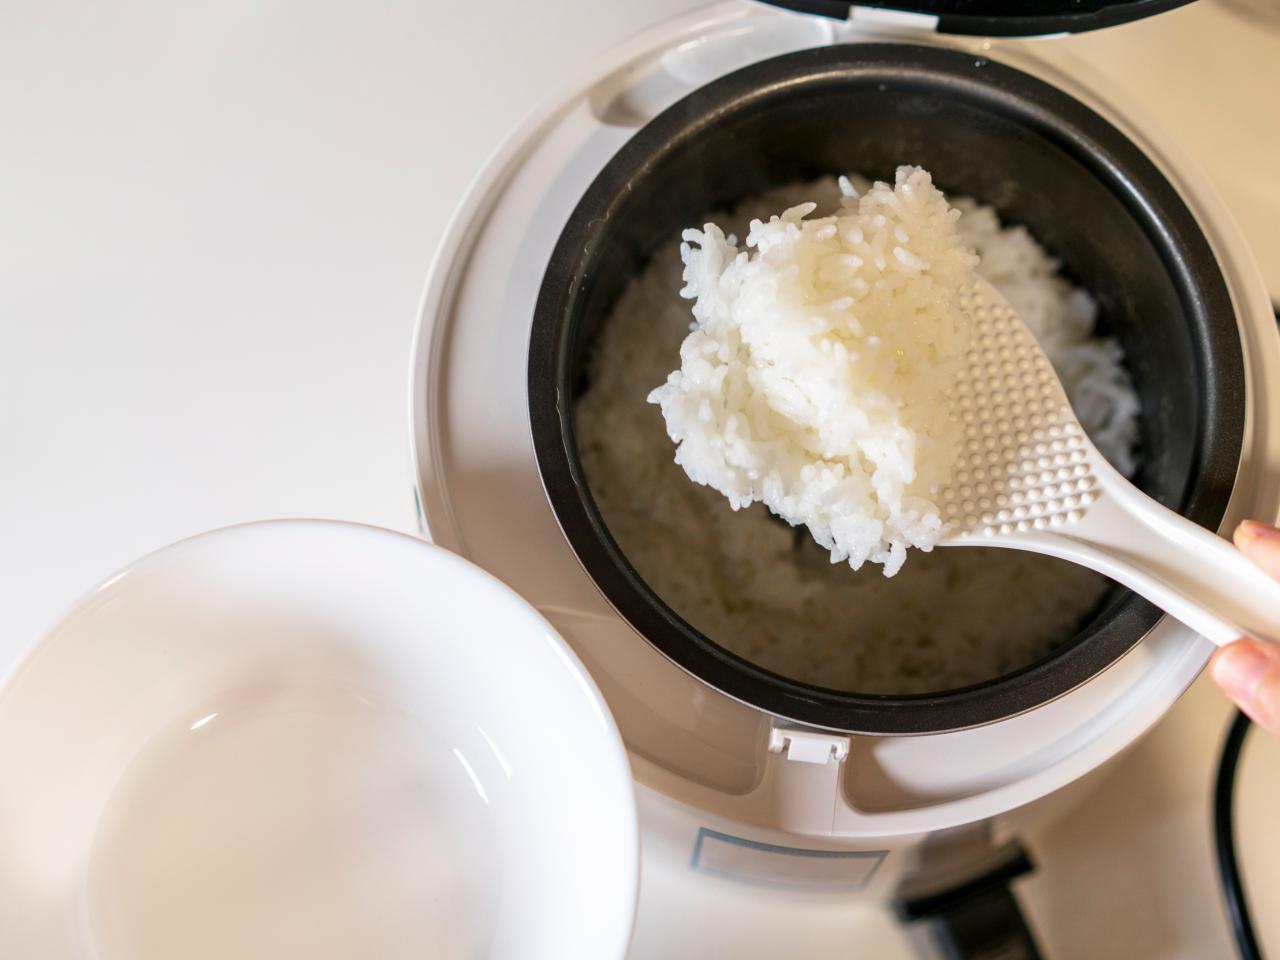 How Much Rice and Water Should You Put in an Aroma Rice Cooker?